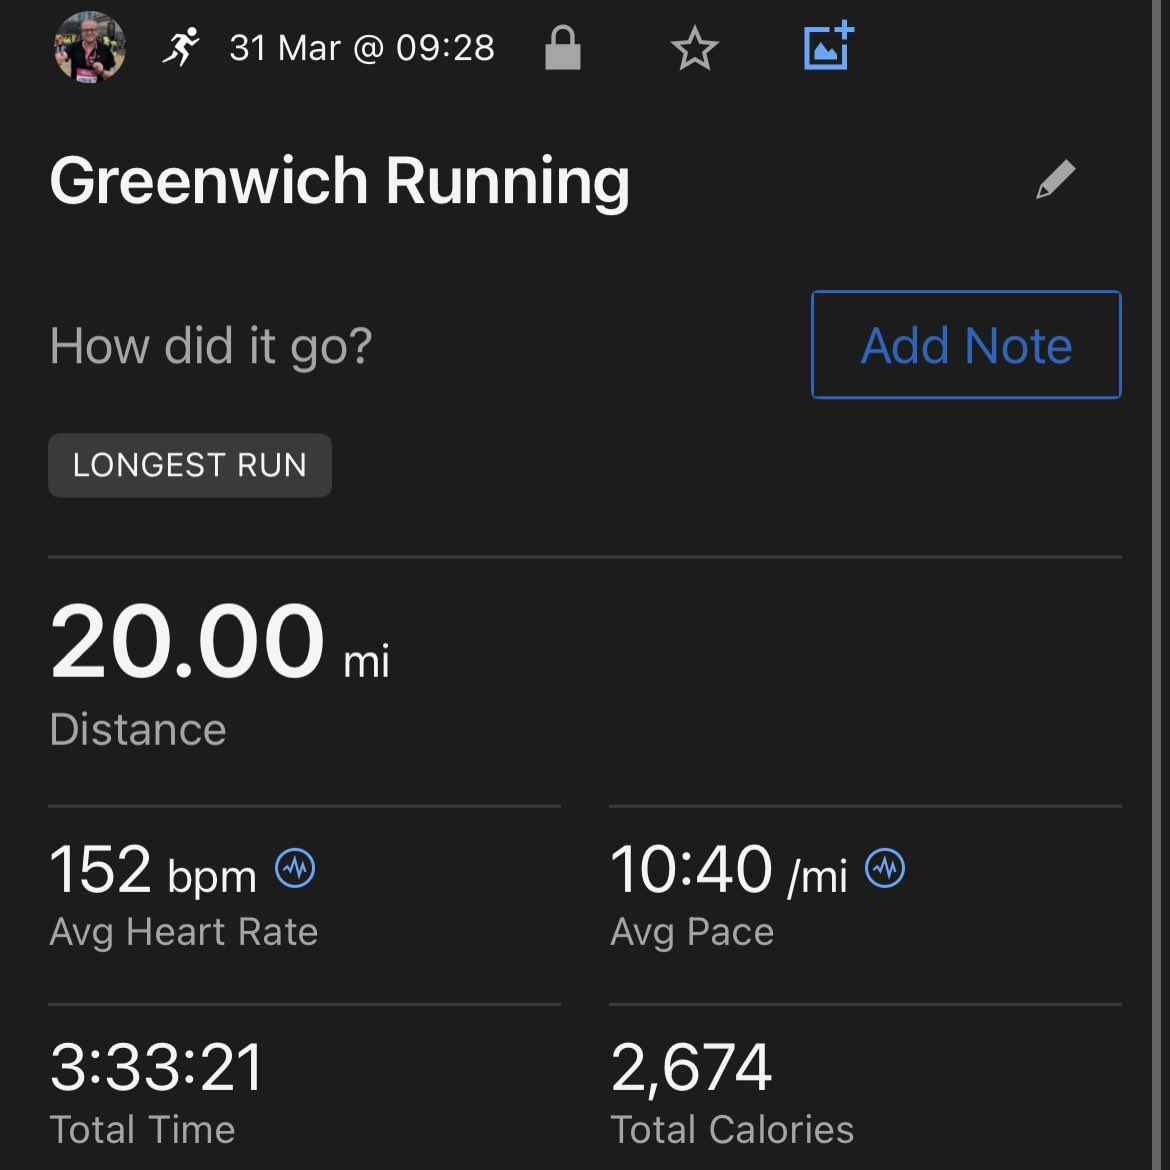 Big relief to get my last mega training run for @LondonMarathon over with!🏃🏼‍♂️🎯 20 miles Blackheath> Greenwich Park> Charlton> Woolwich> Eltham> New Eltham> Coldharbour> Mottingham> Eltham> Heath & Park again 💪 Fundraising link for @TheStrokeAssoc 🙏 justgiving.com/page/matthartl…